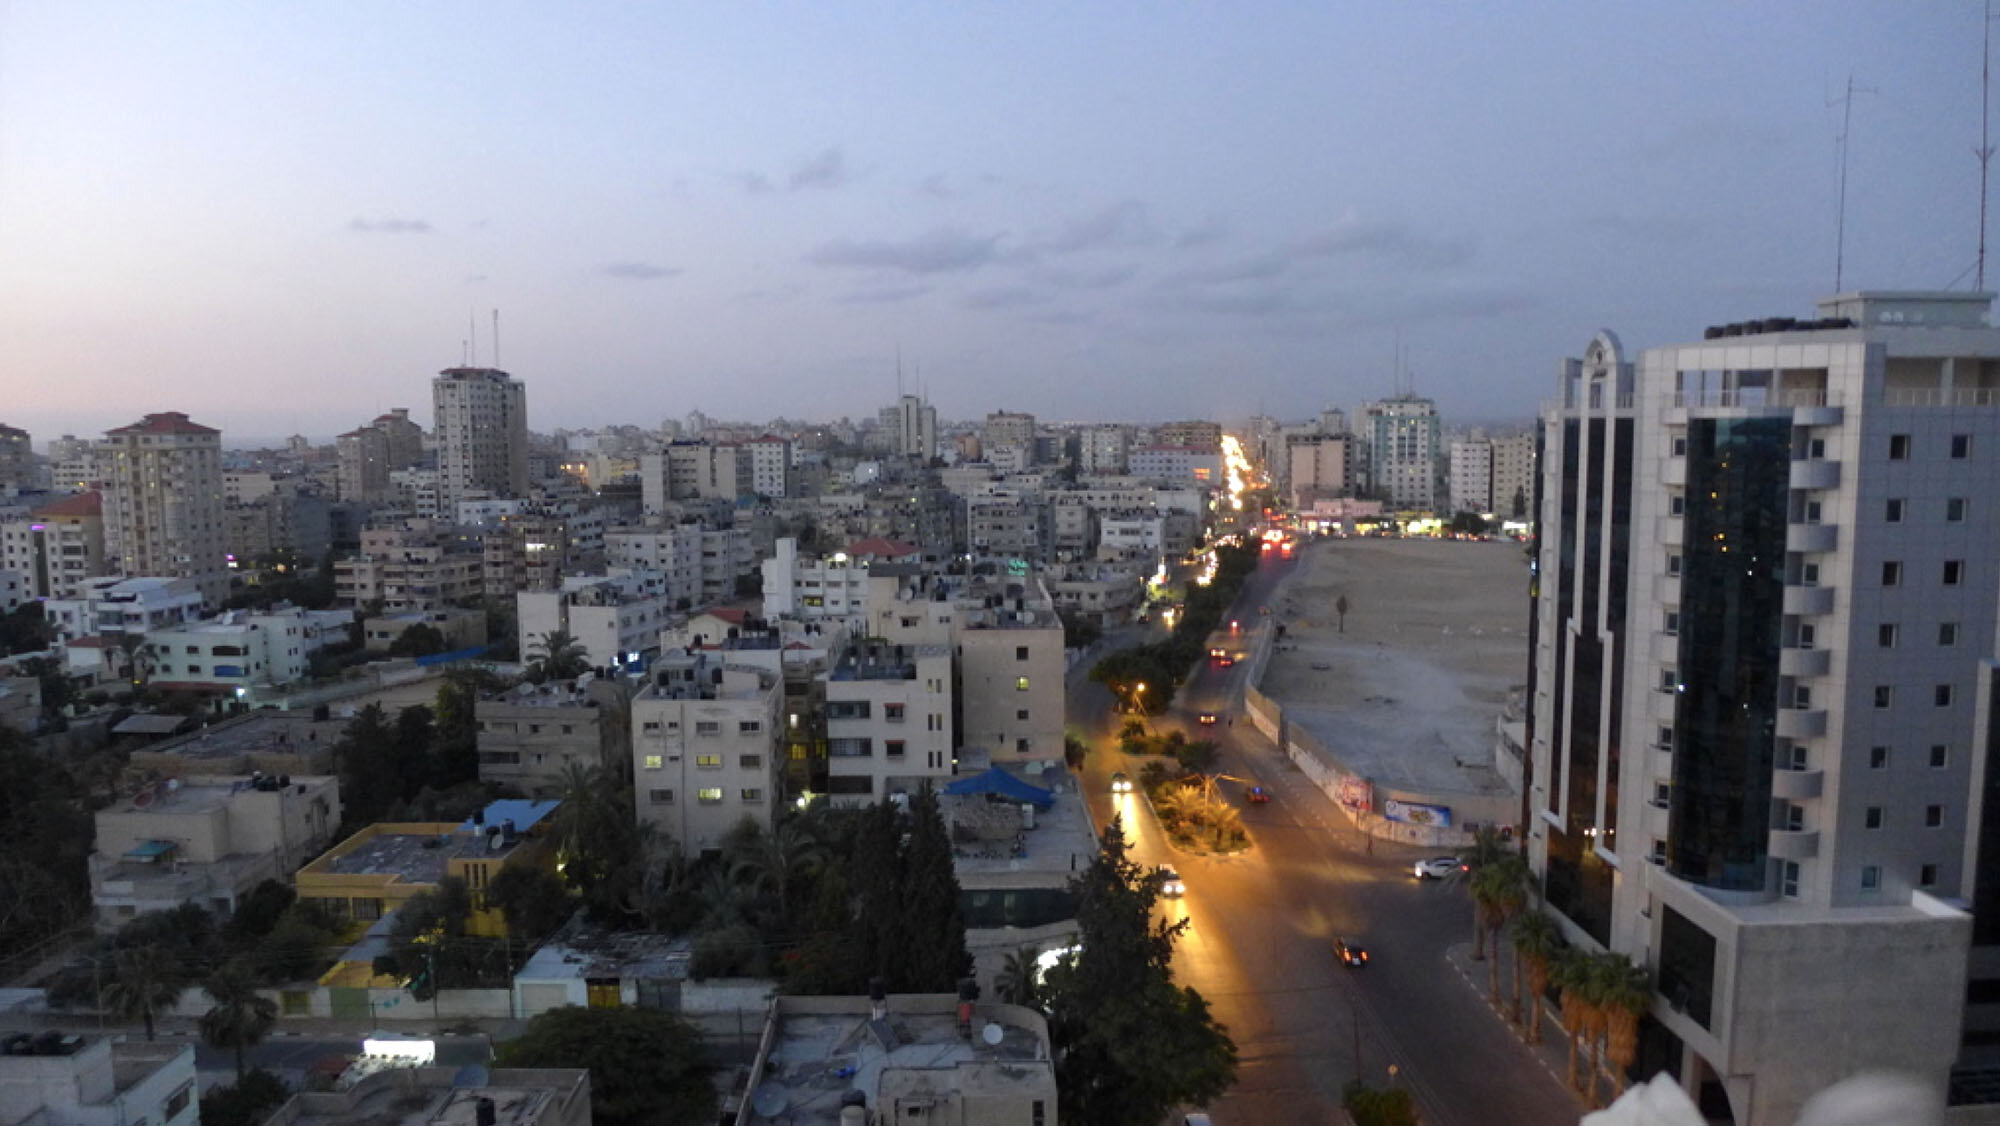 Gaza street viewed from the LAMA production office in Gaza City in 2013 (the building was destroyed in the 2014 war, meanwhile the turquoise building in the background, upper right, is the Al-Jalla building containing the Associated Press and Al-Jazeera offices that was bombed and leveled to the ground in May 2021.)